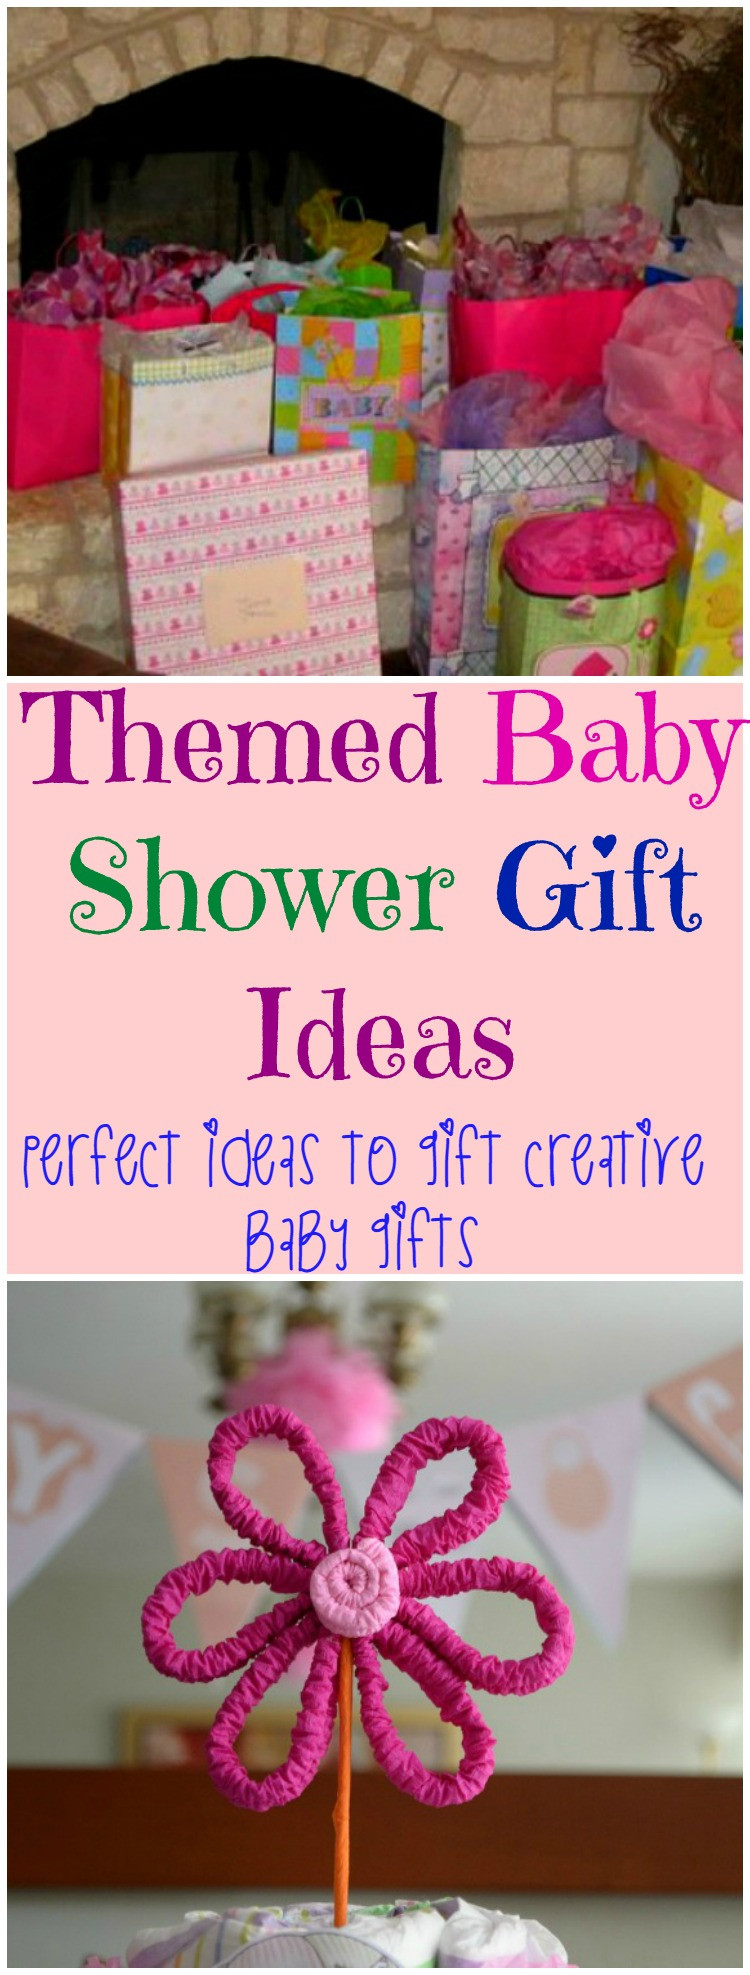 Gift Ideas For Mom To Be At Baby Shower
 Themed Baby Shower Gift Ideas